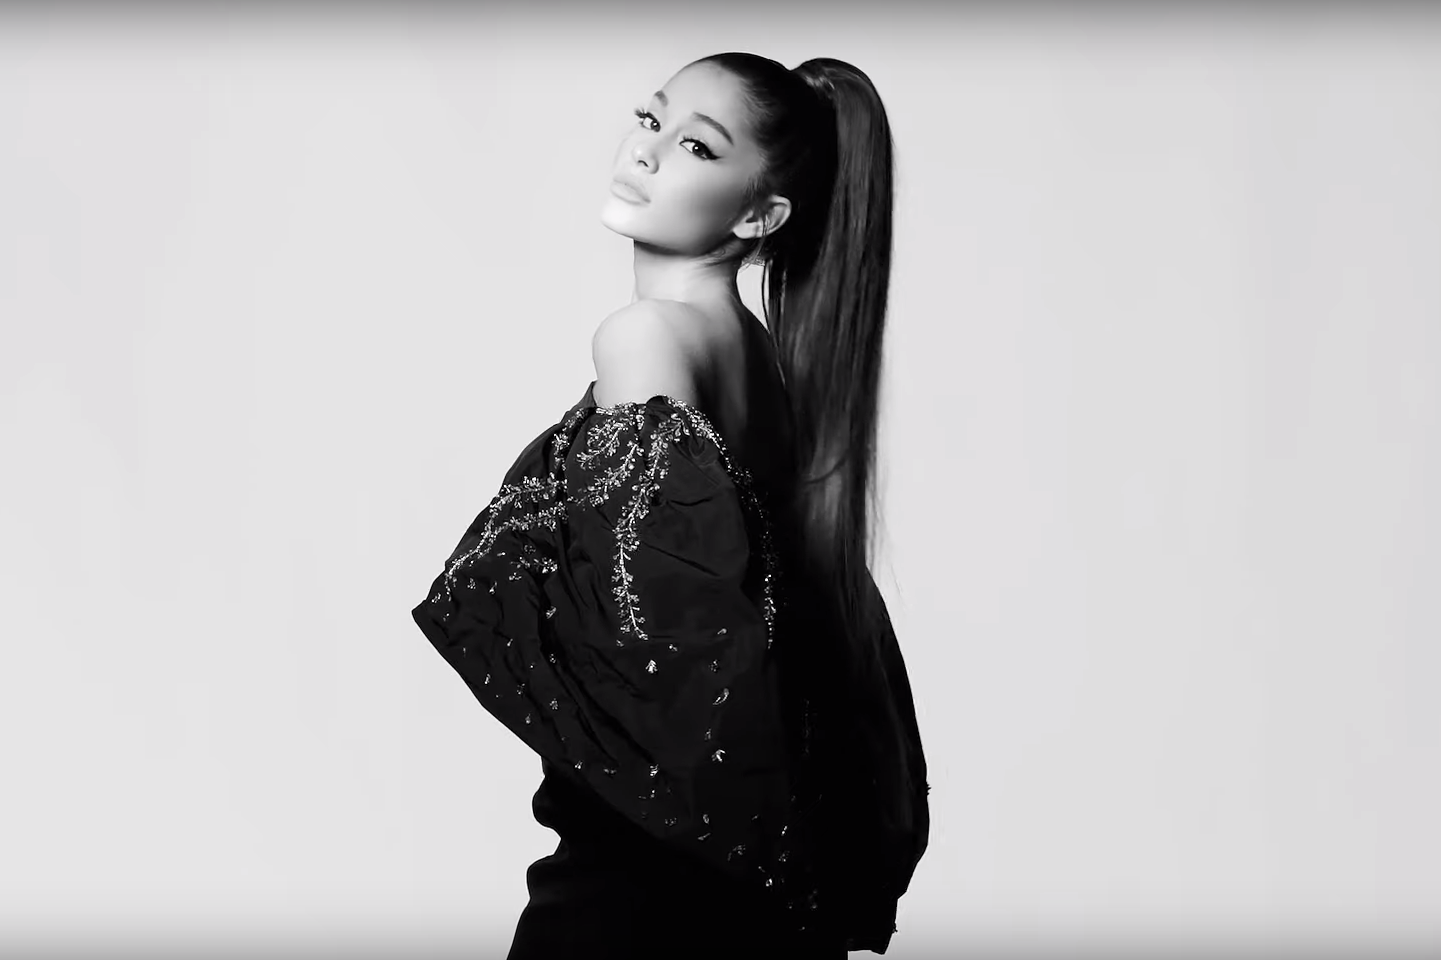 Ariana Grande Improvises Song In Video For New Givenchy